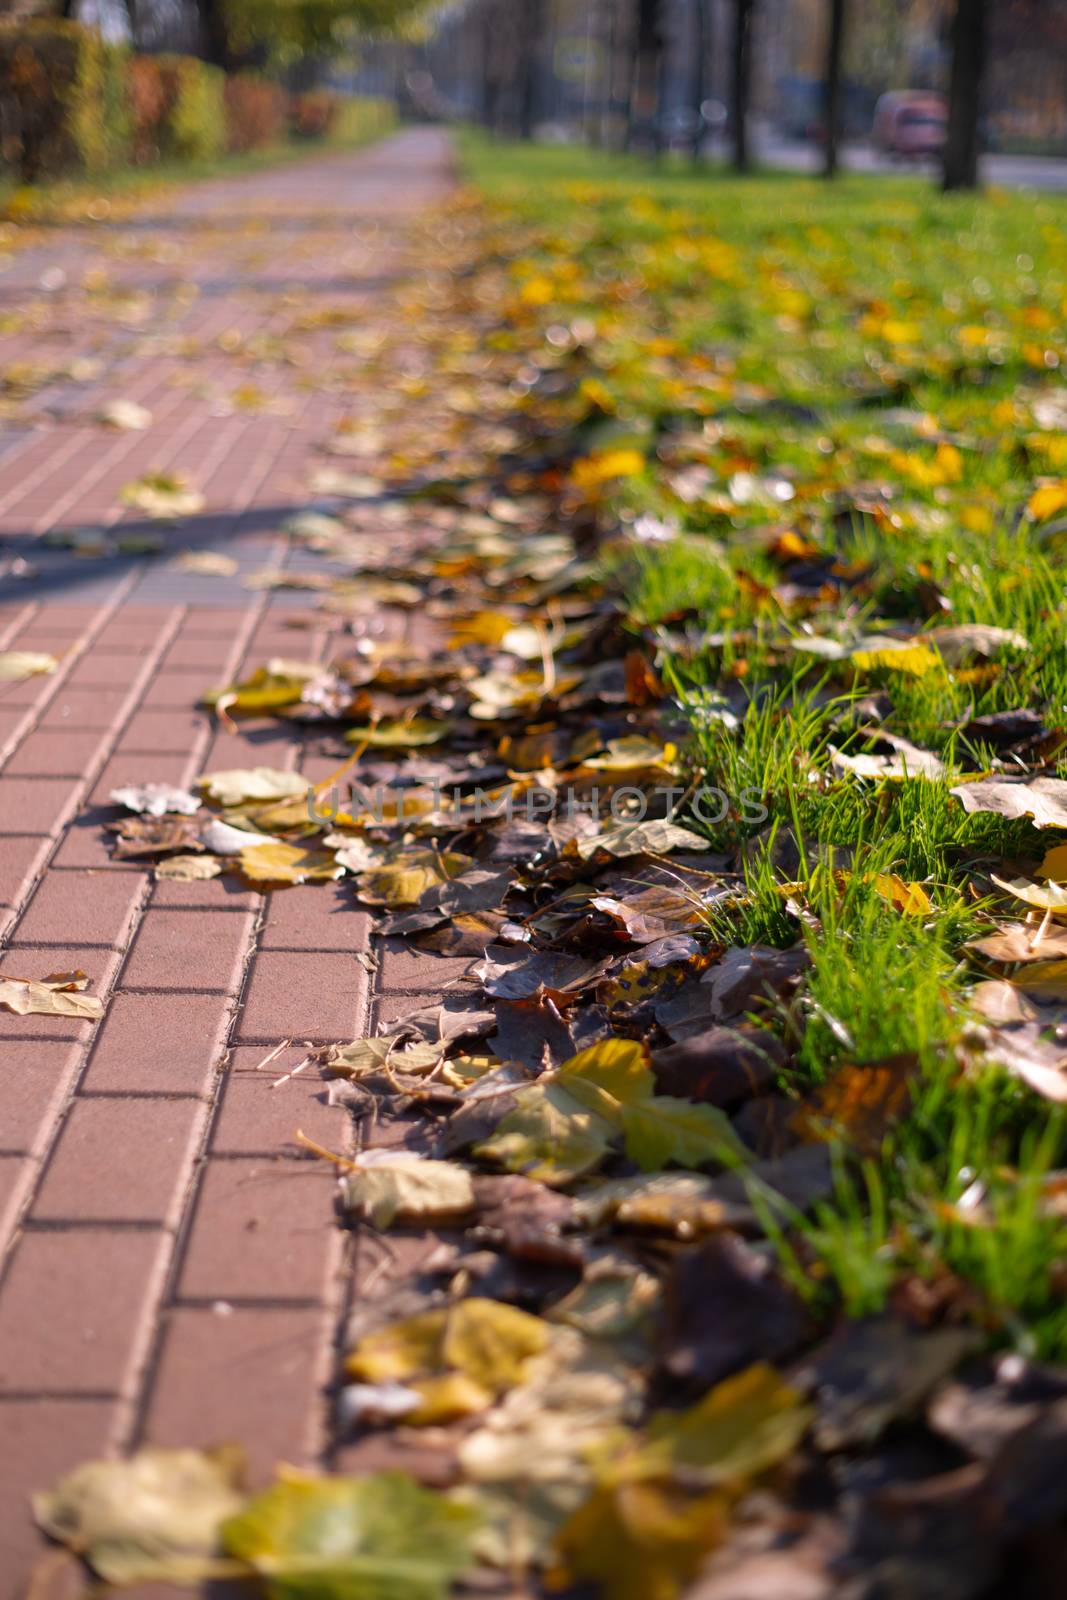 Autumn walking road with leaves at the curb. Green grass and orange leaves.